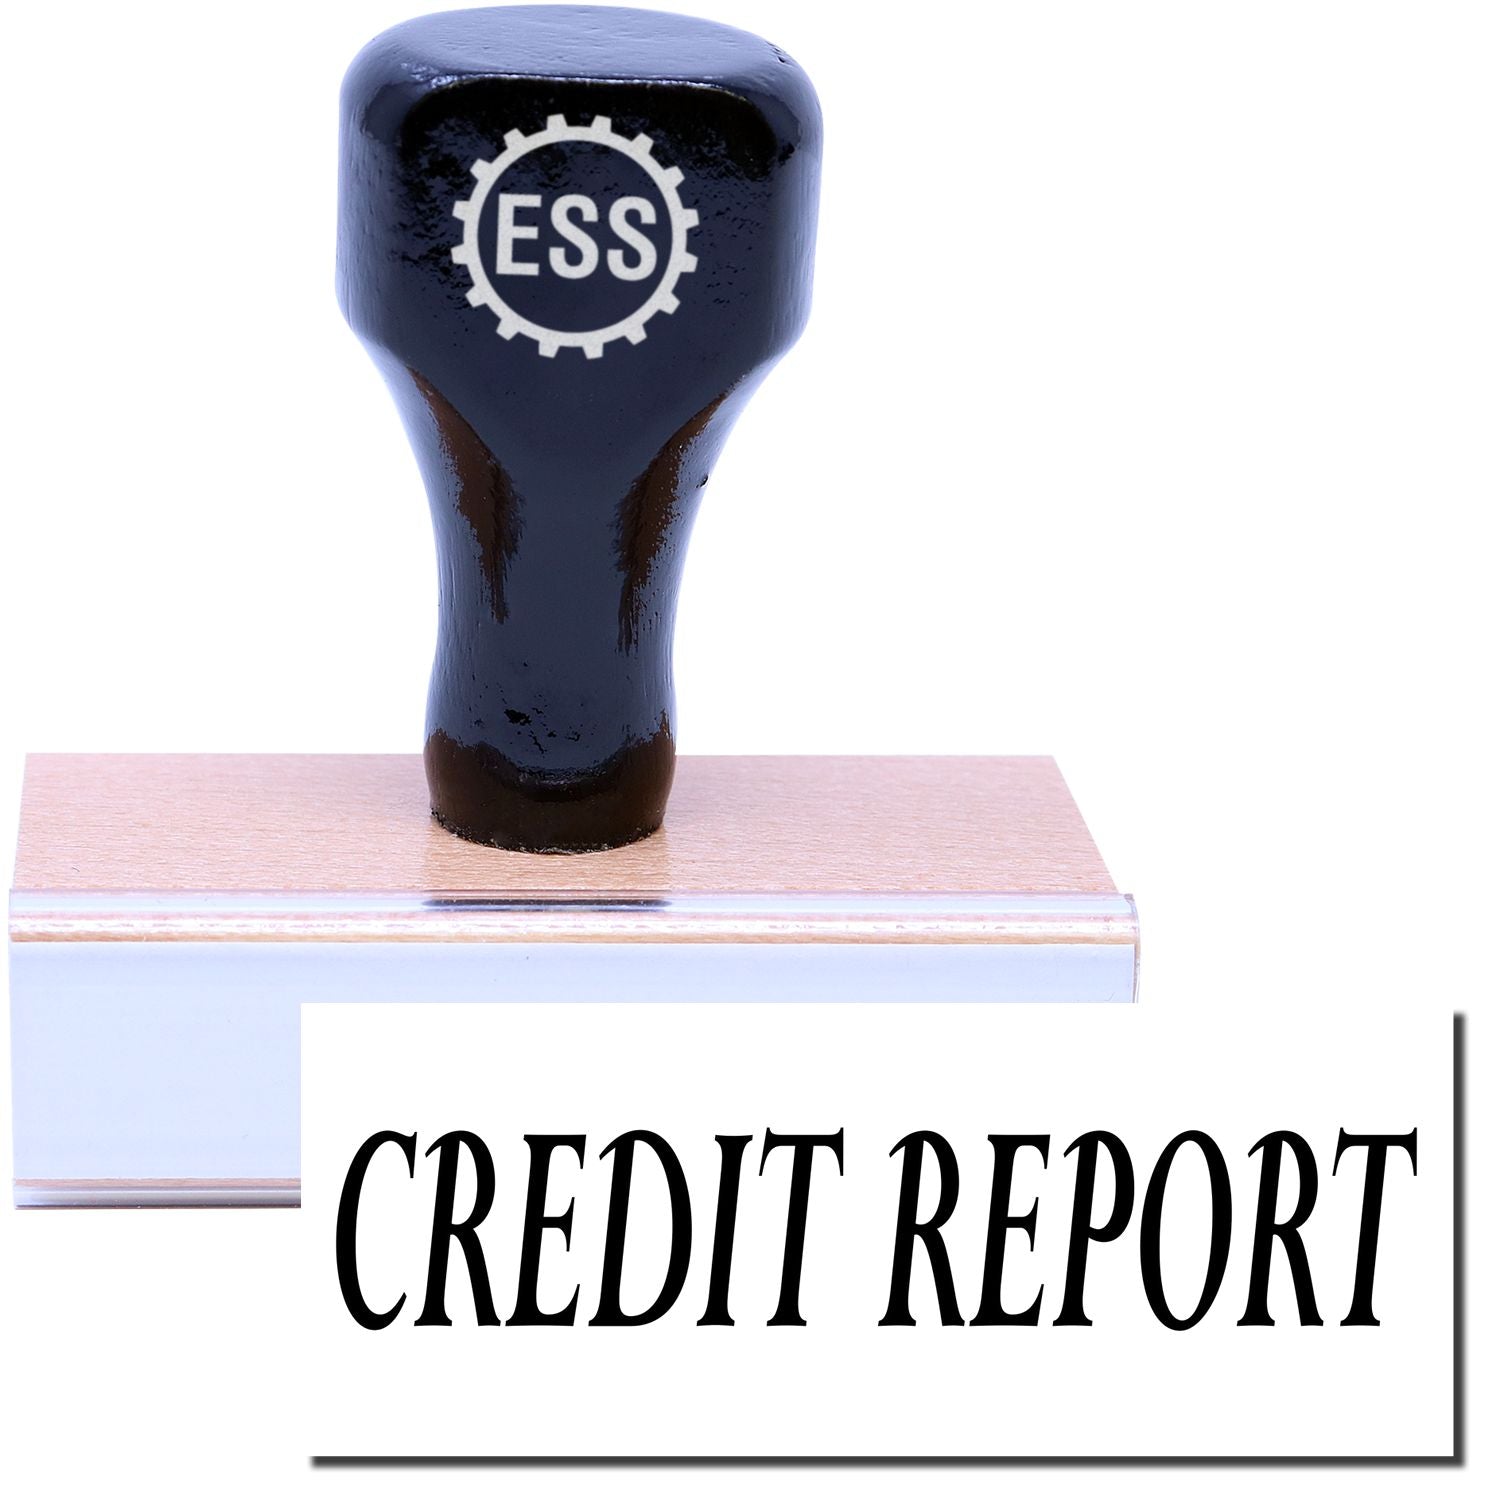 A stock office rubber stamp with a stamped image showing how the text "CREDIT REPORT" is displayed after stamping.